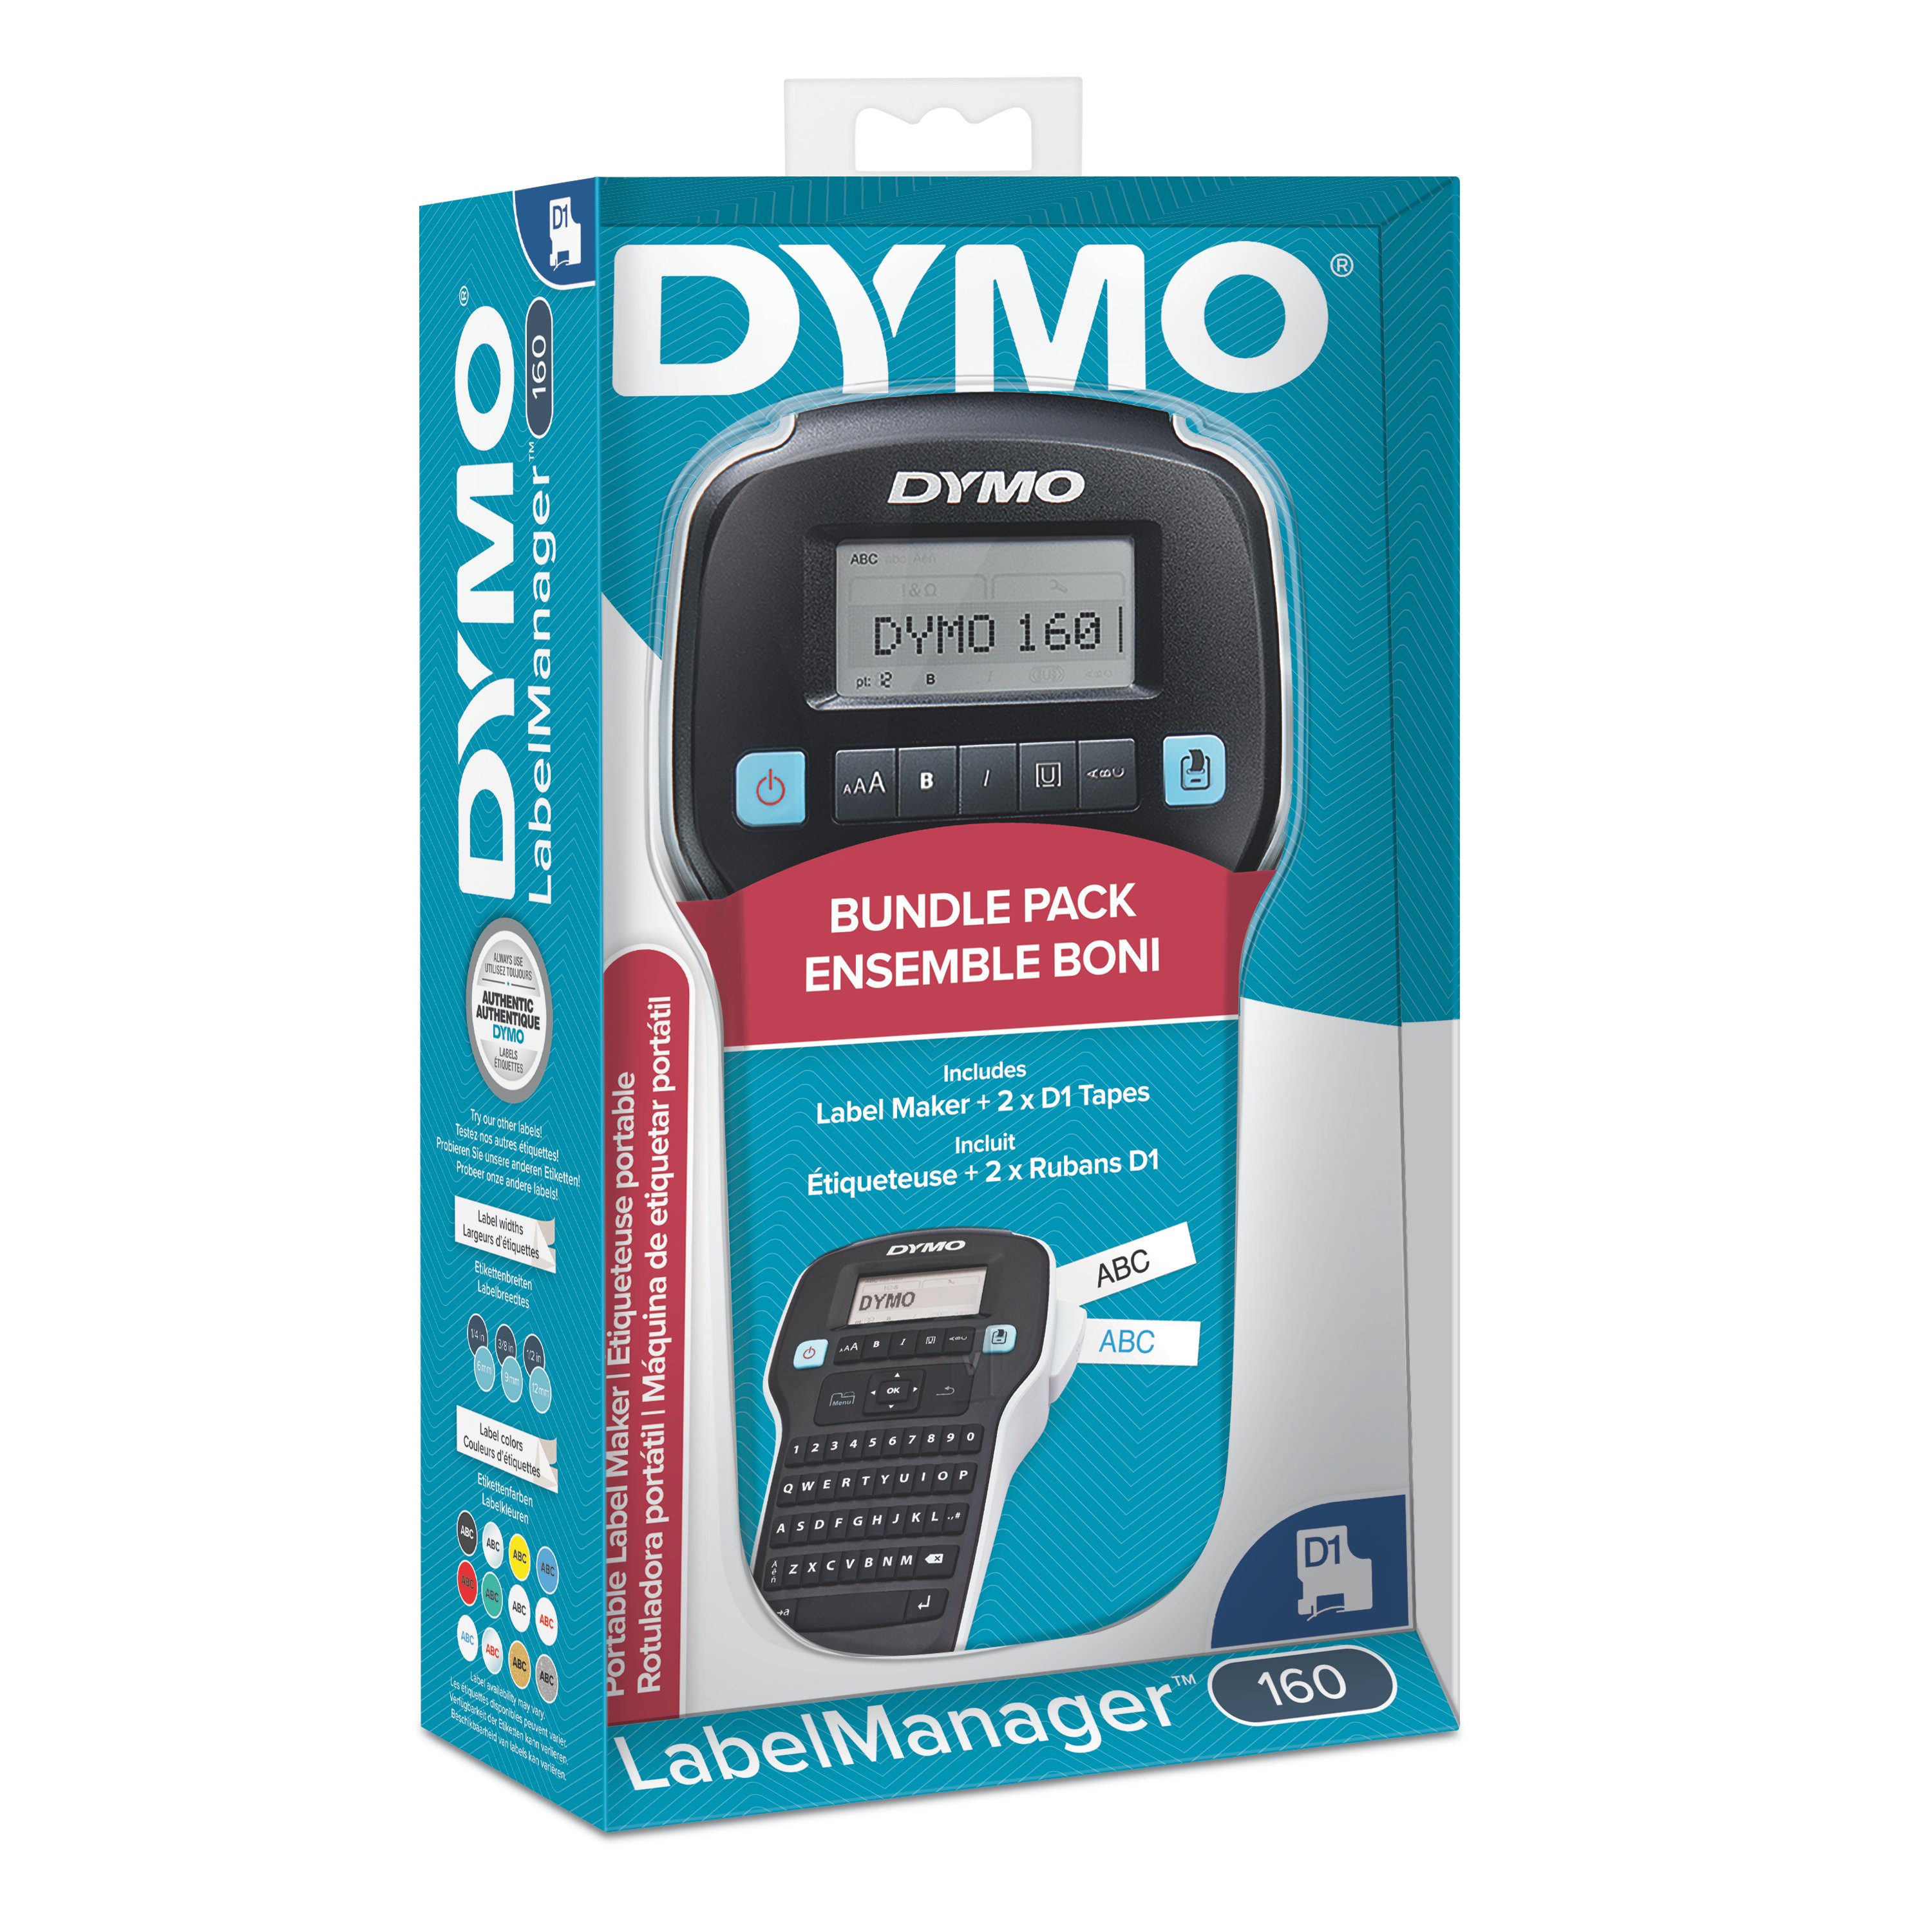 DYMO LabelManager 160 Portable Label Maker with 2 D1 Label